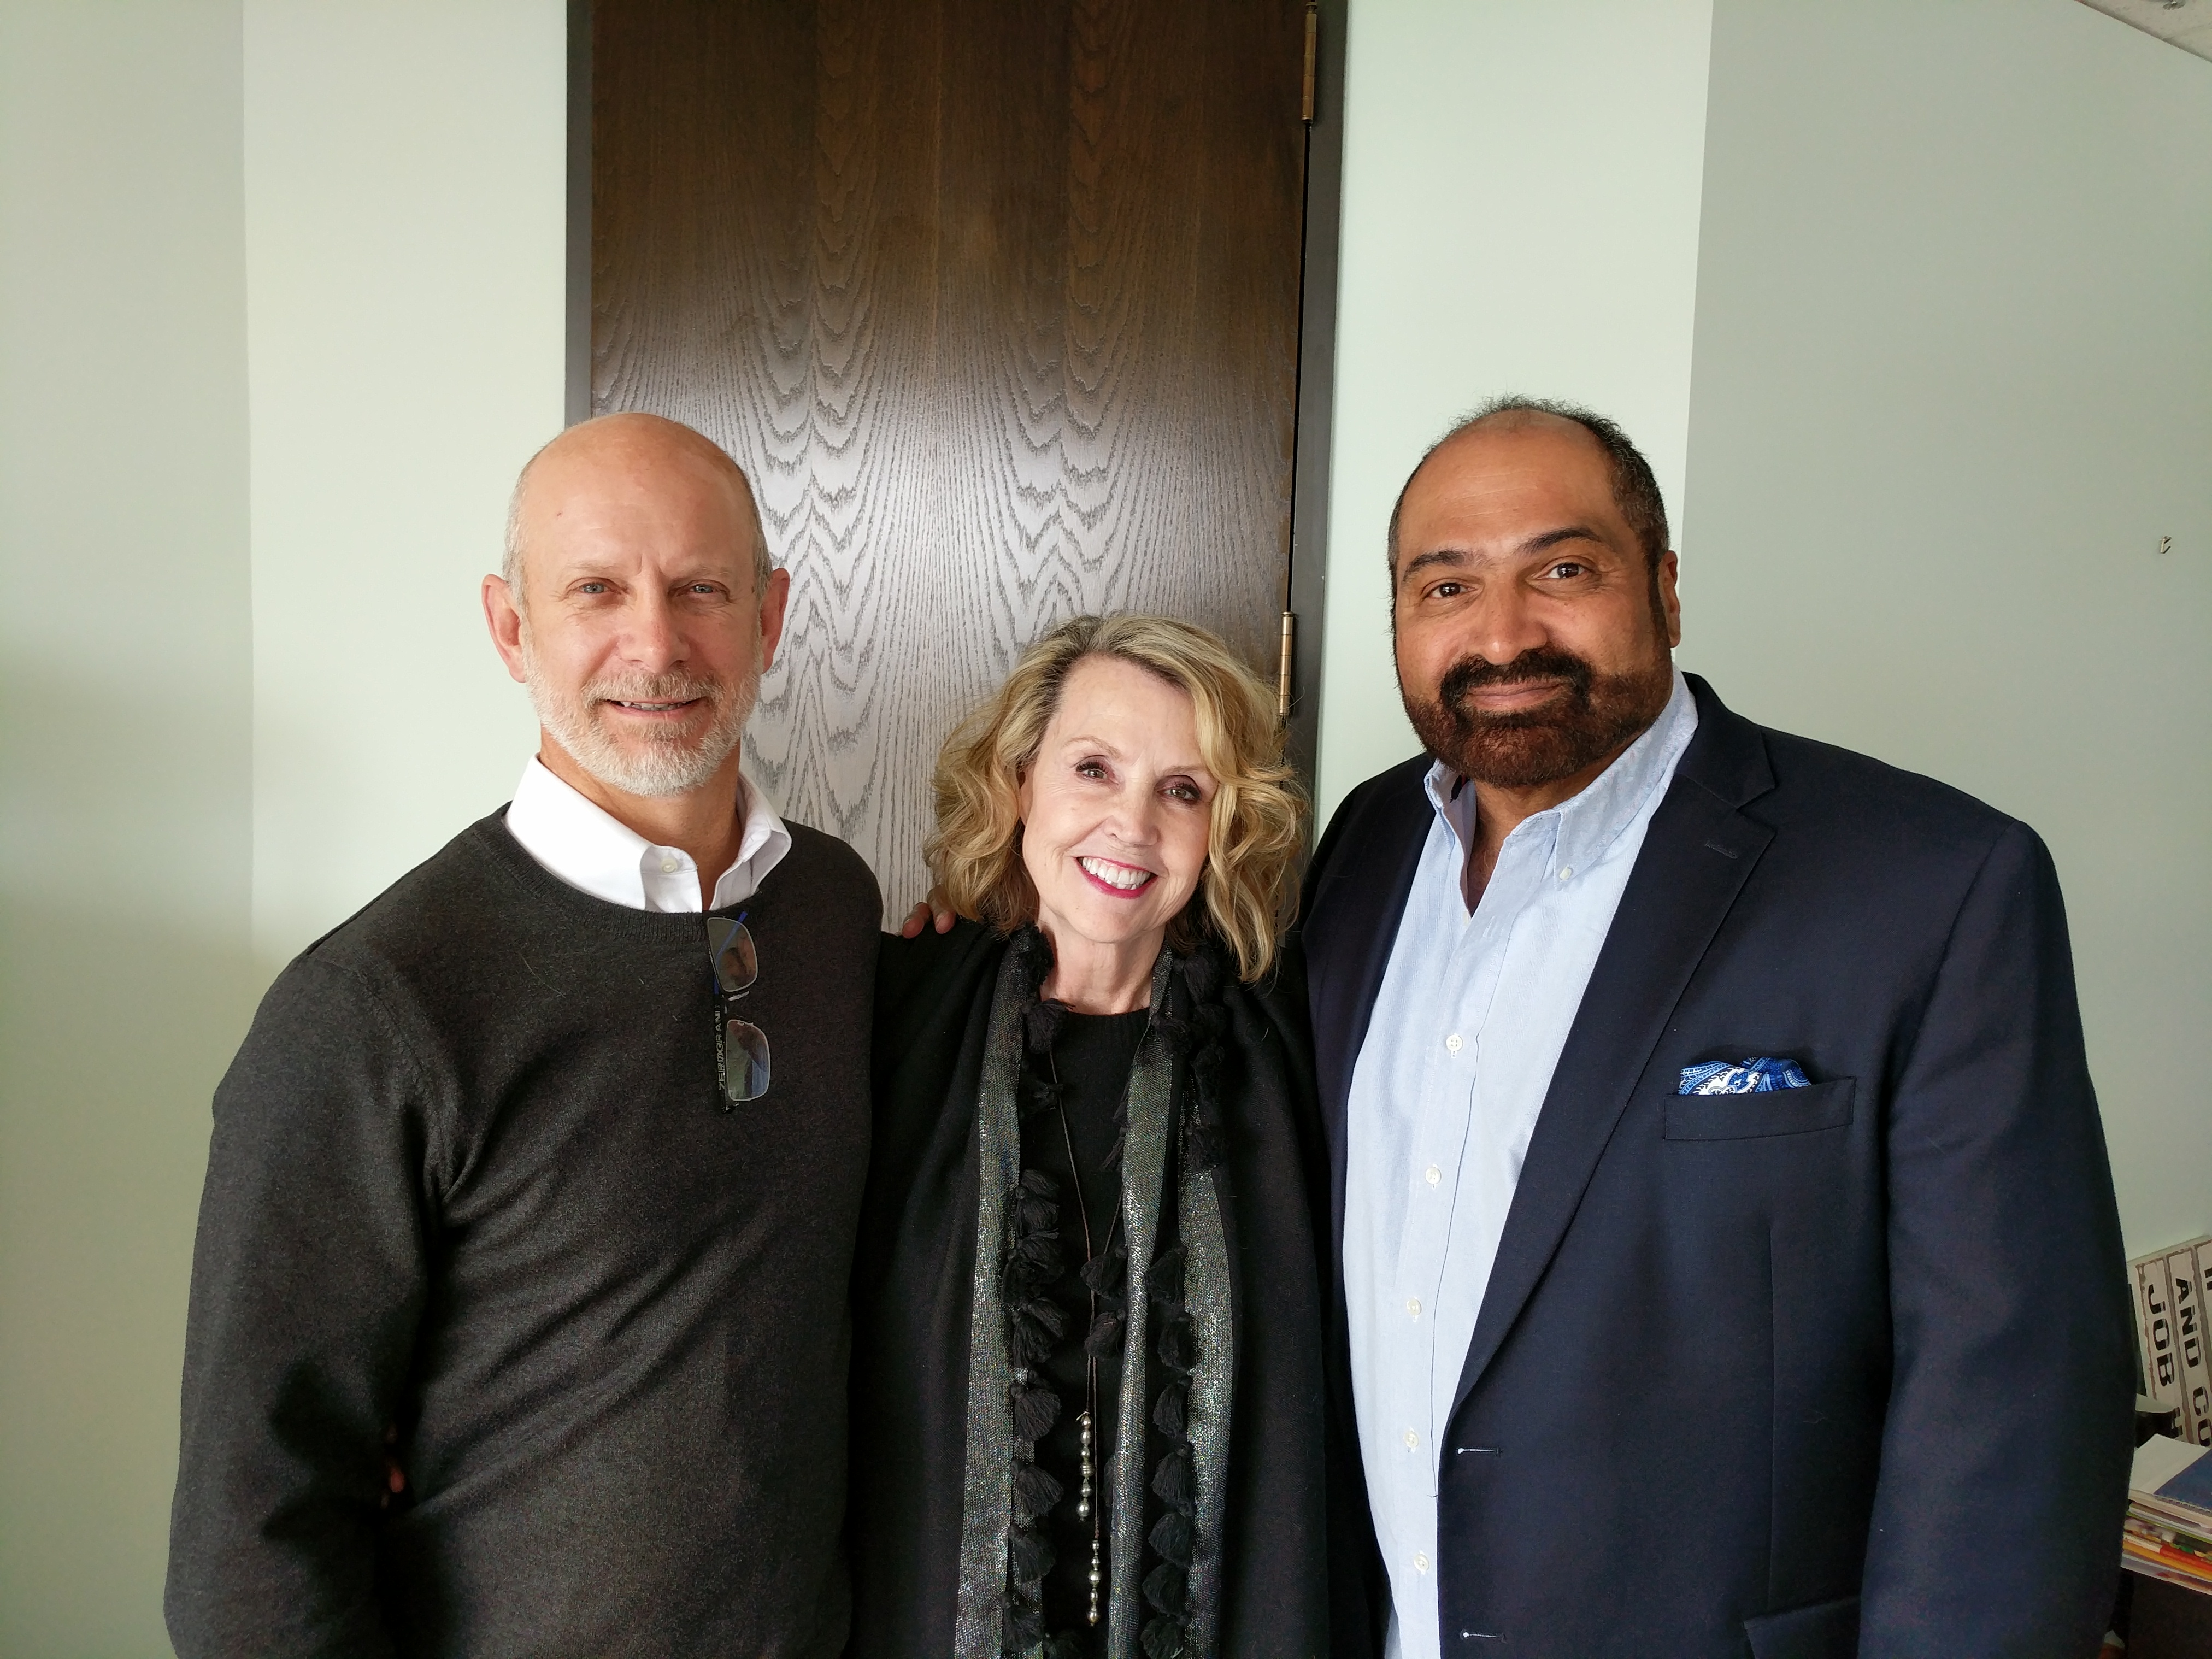 Dr. Erick Lauber,  Committee Co-chair Joyce Sharman, and Franco Harris. Committee Co-chair Vince Mercuri is absent from the photo.